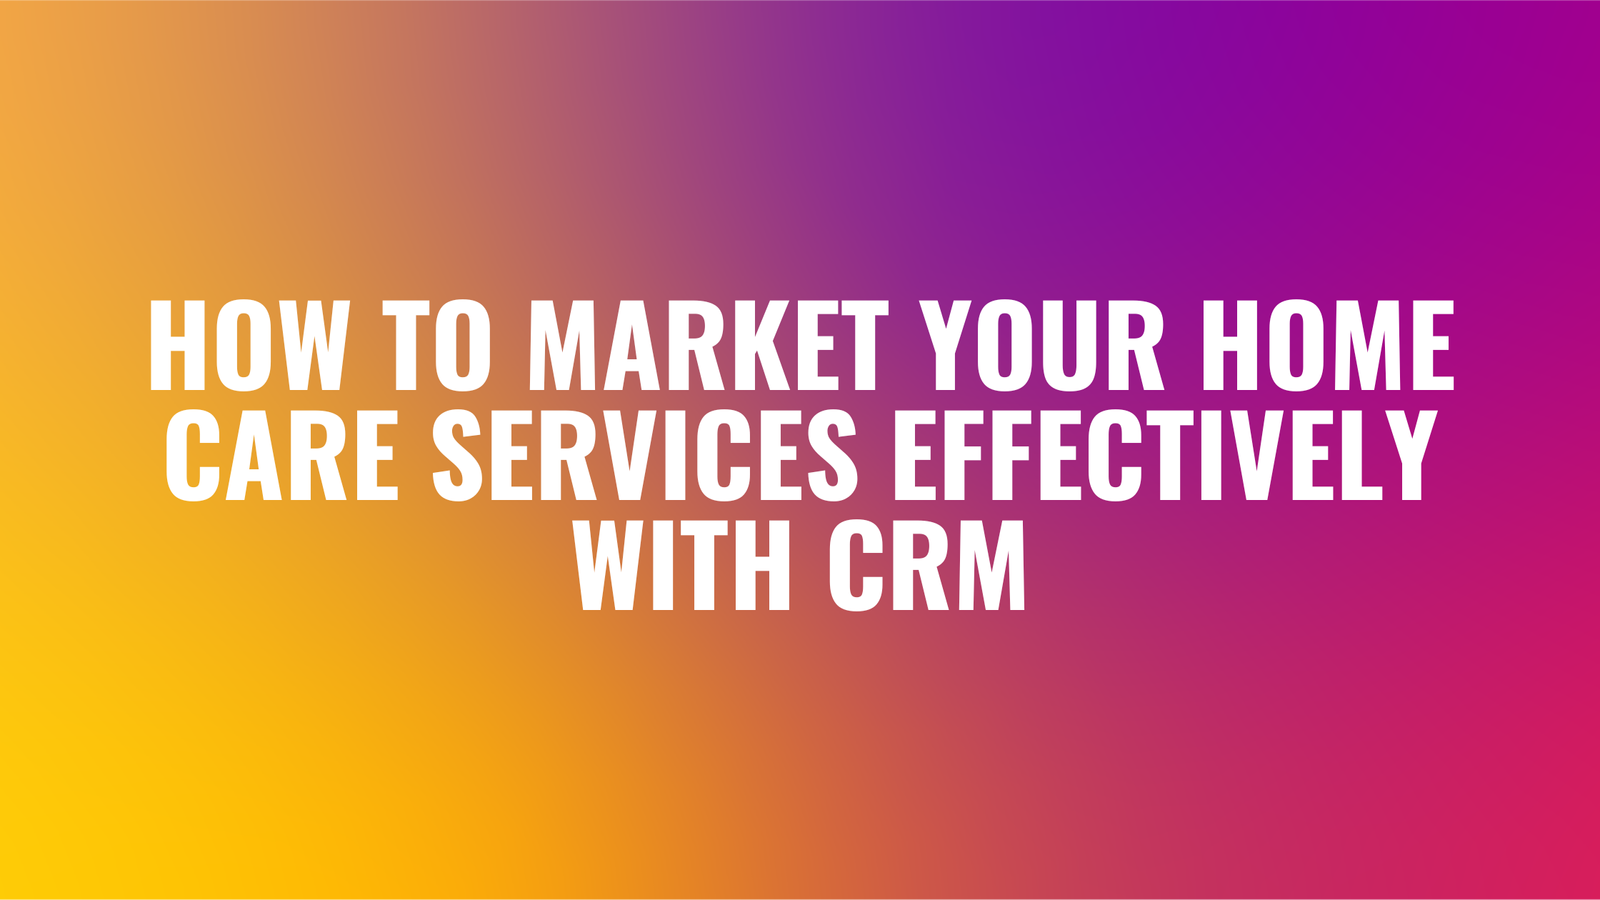 How to Market Your Home Care Services Effectively with CRM